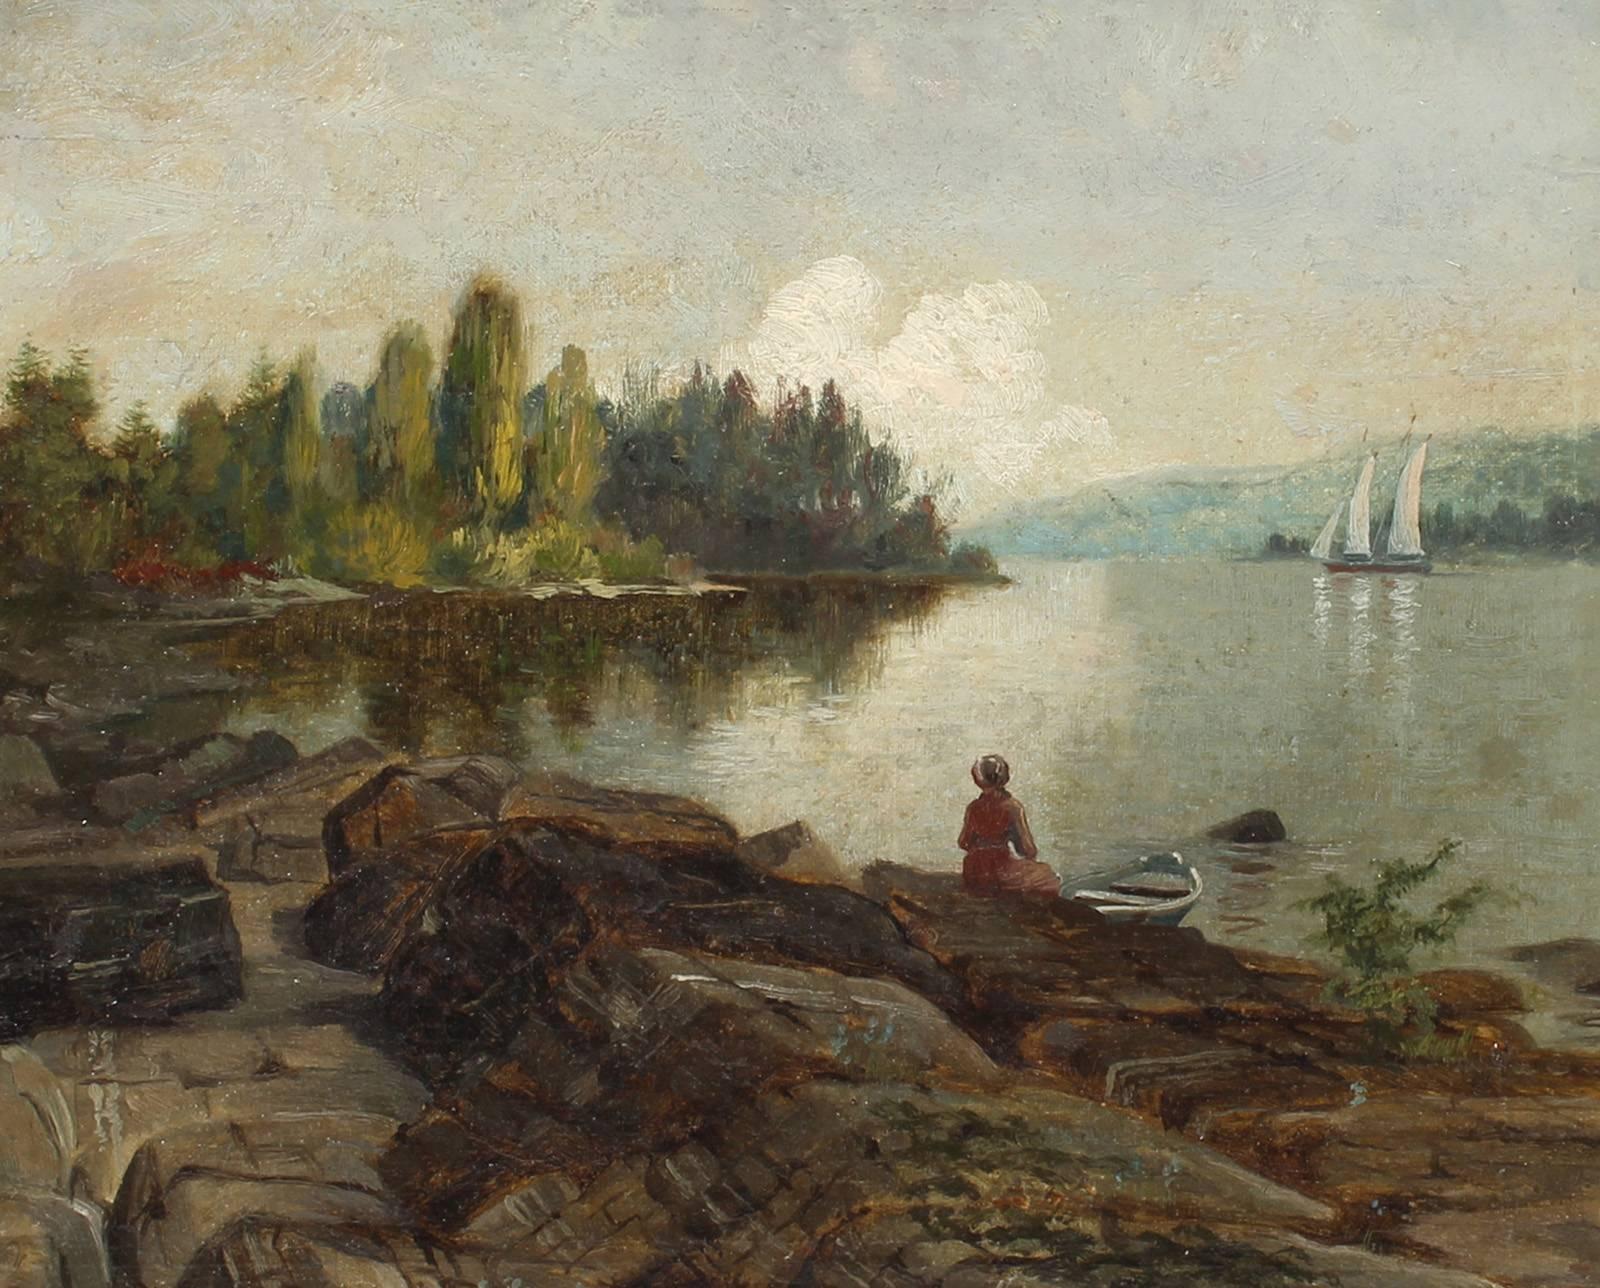 Unknown Landscape Painting - Woman by the Water in the Hudson Valley